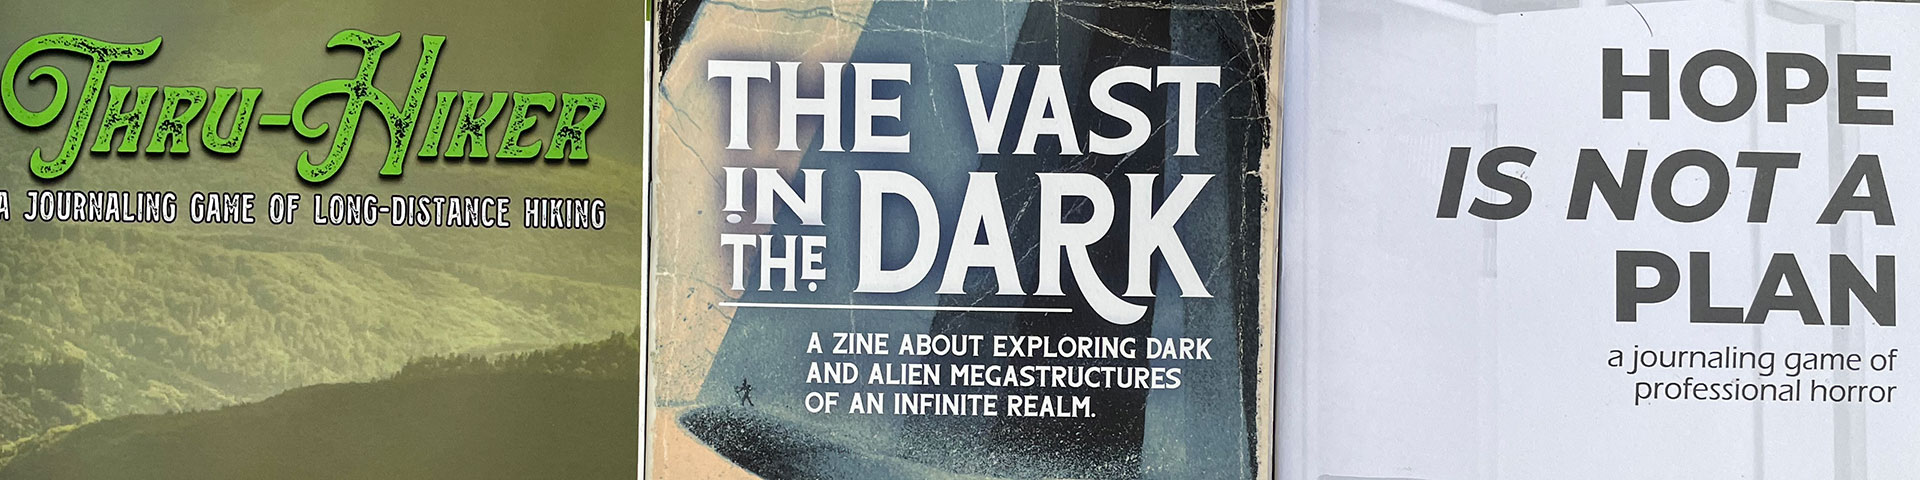 Cover Art for Thru-Hiker, The Vast in the Dark, and Hope Is Not A Plan